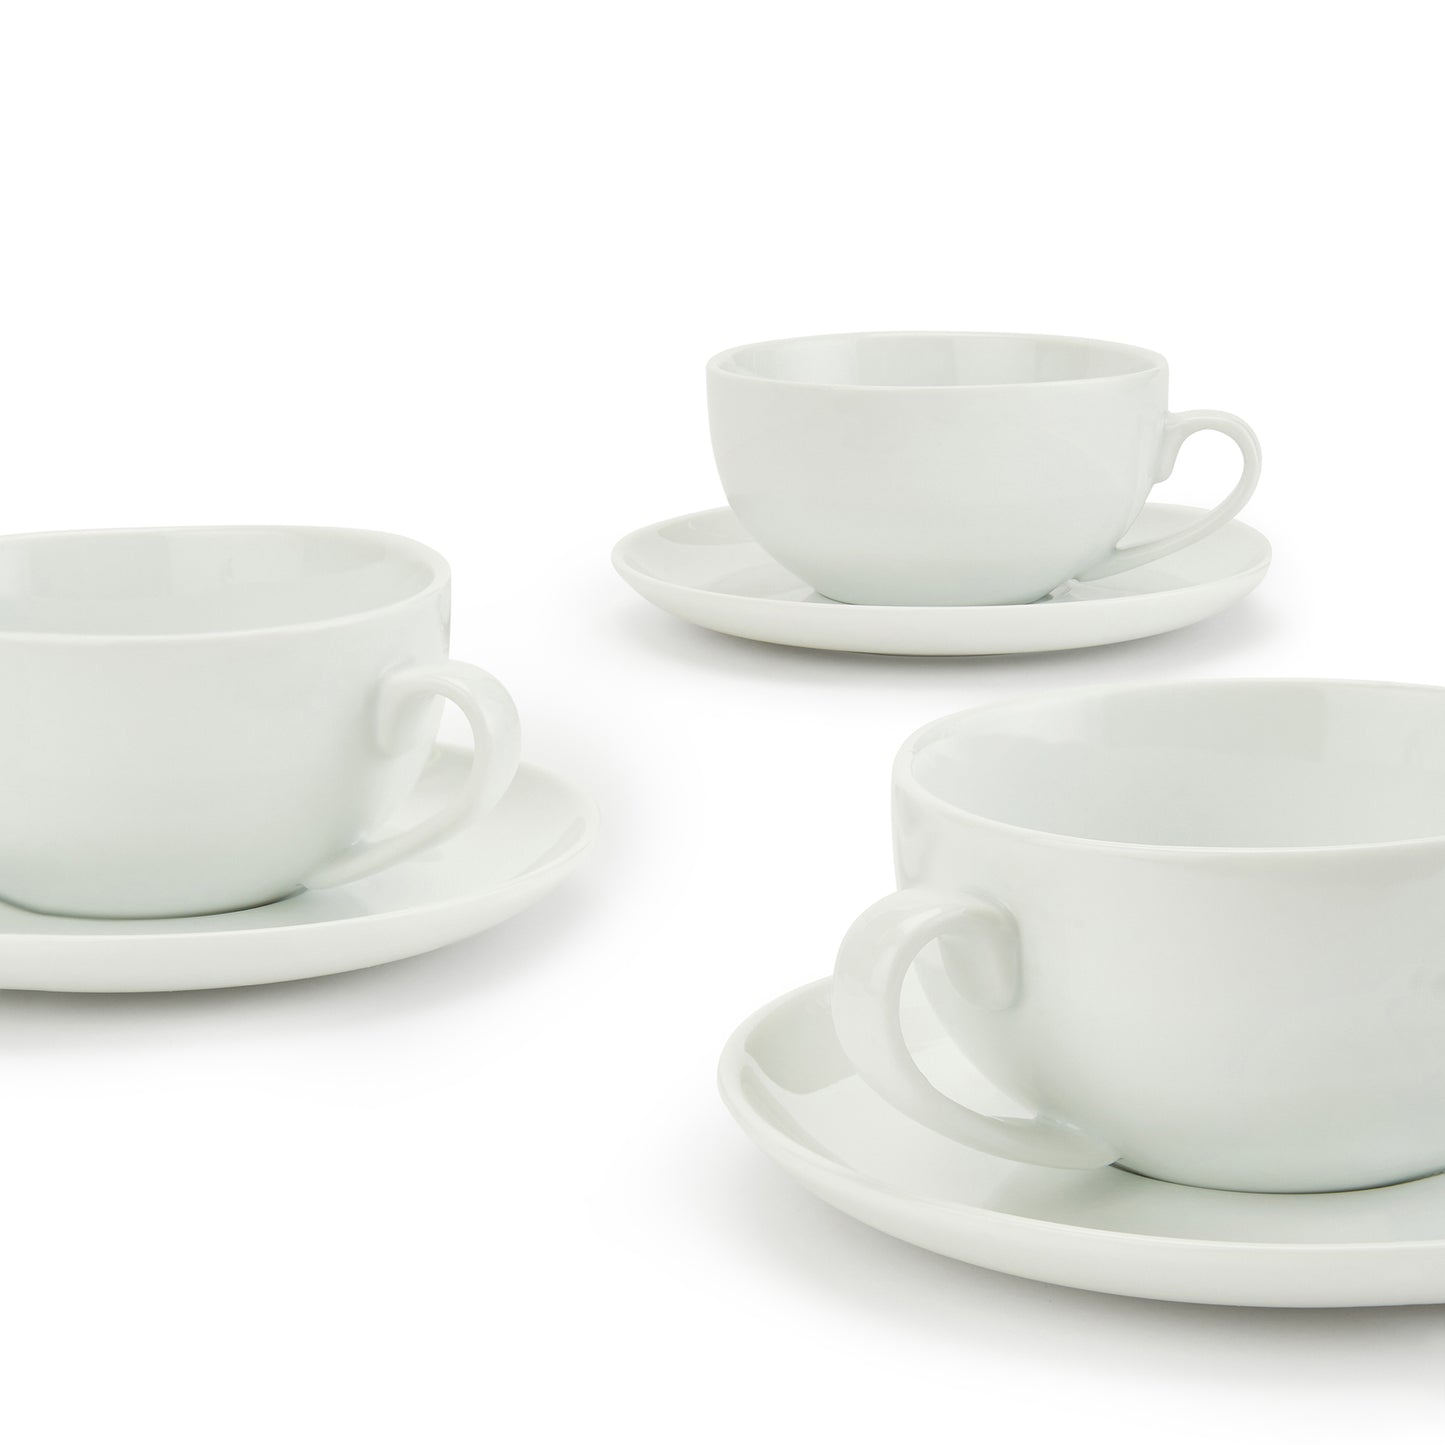 Set of 6 Super White Deluxe Comfort Extra Large Cappuccino Cups & Saucers